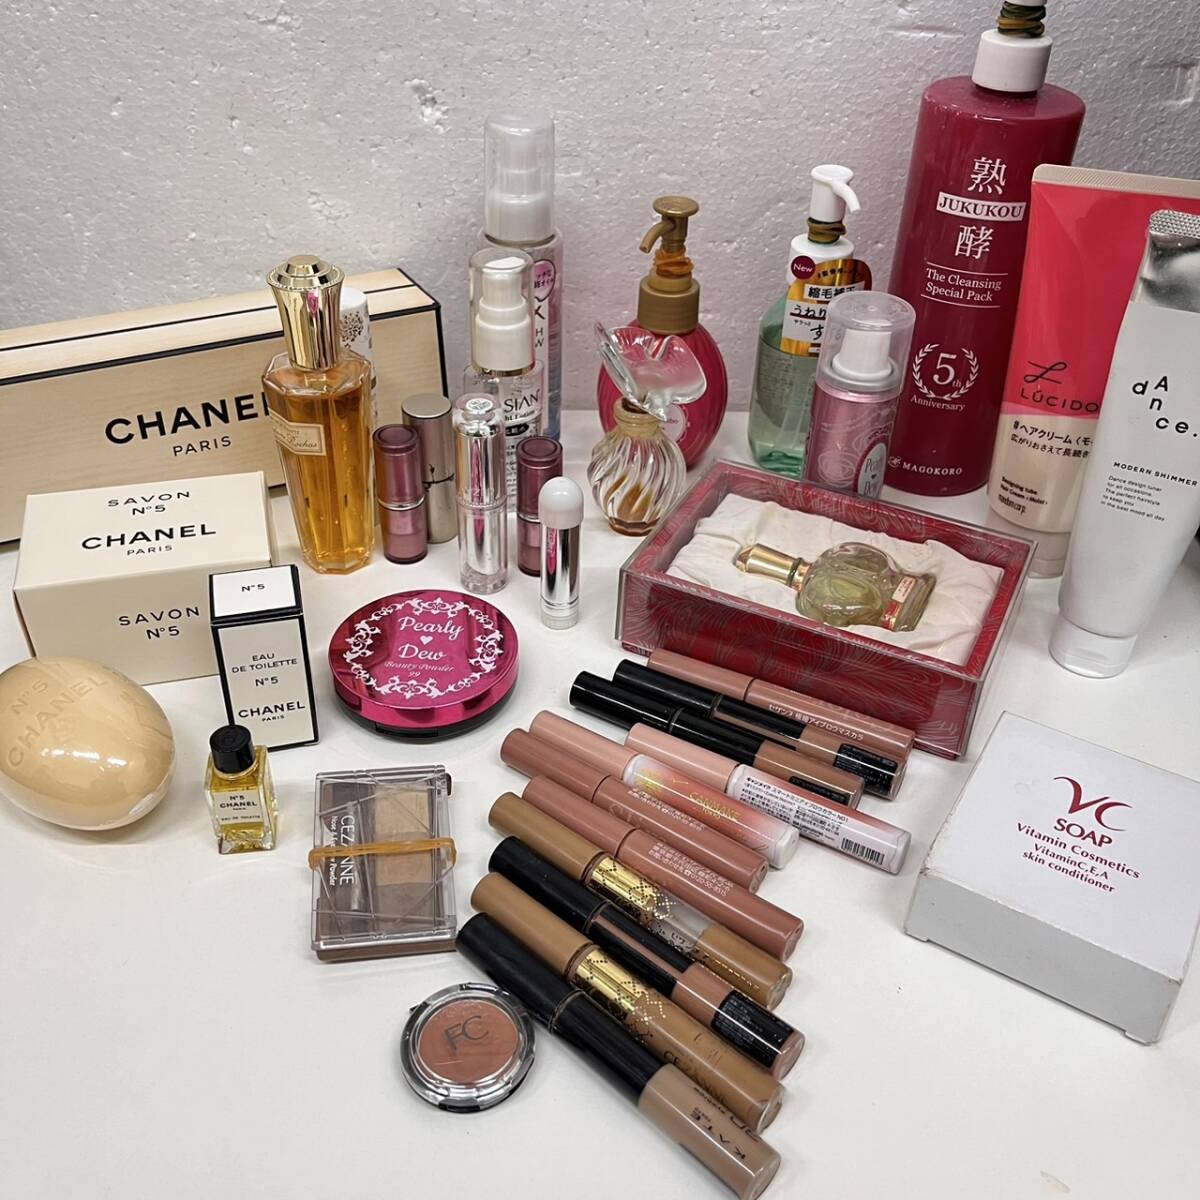 [C-25008a] unused contains CHANEL Chanel brand cosme other brand KATE cosmetics mascara perfume large amount set sale used Junk contains 